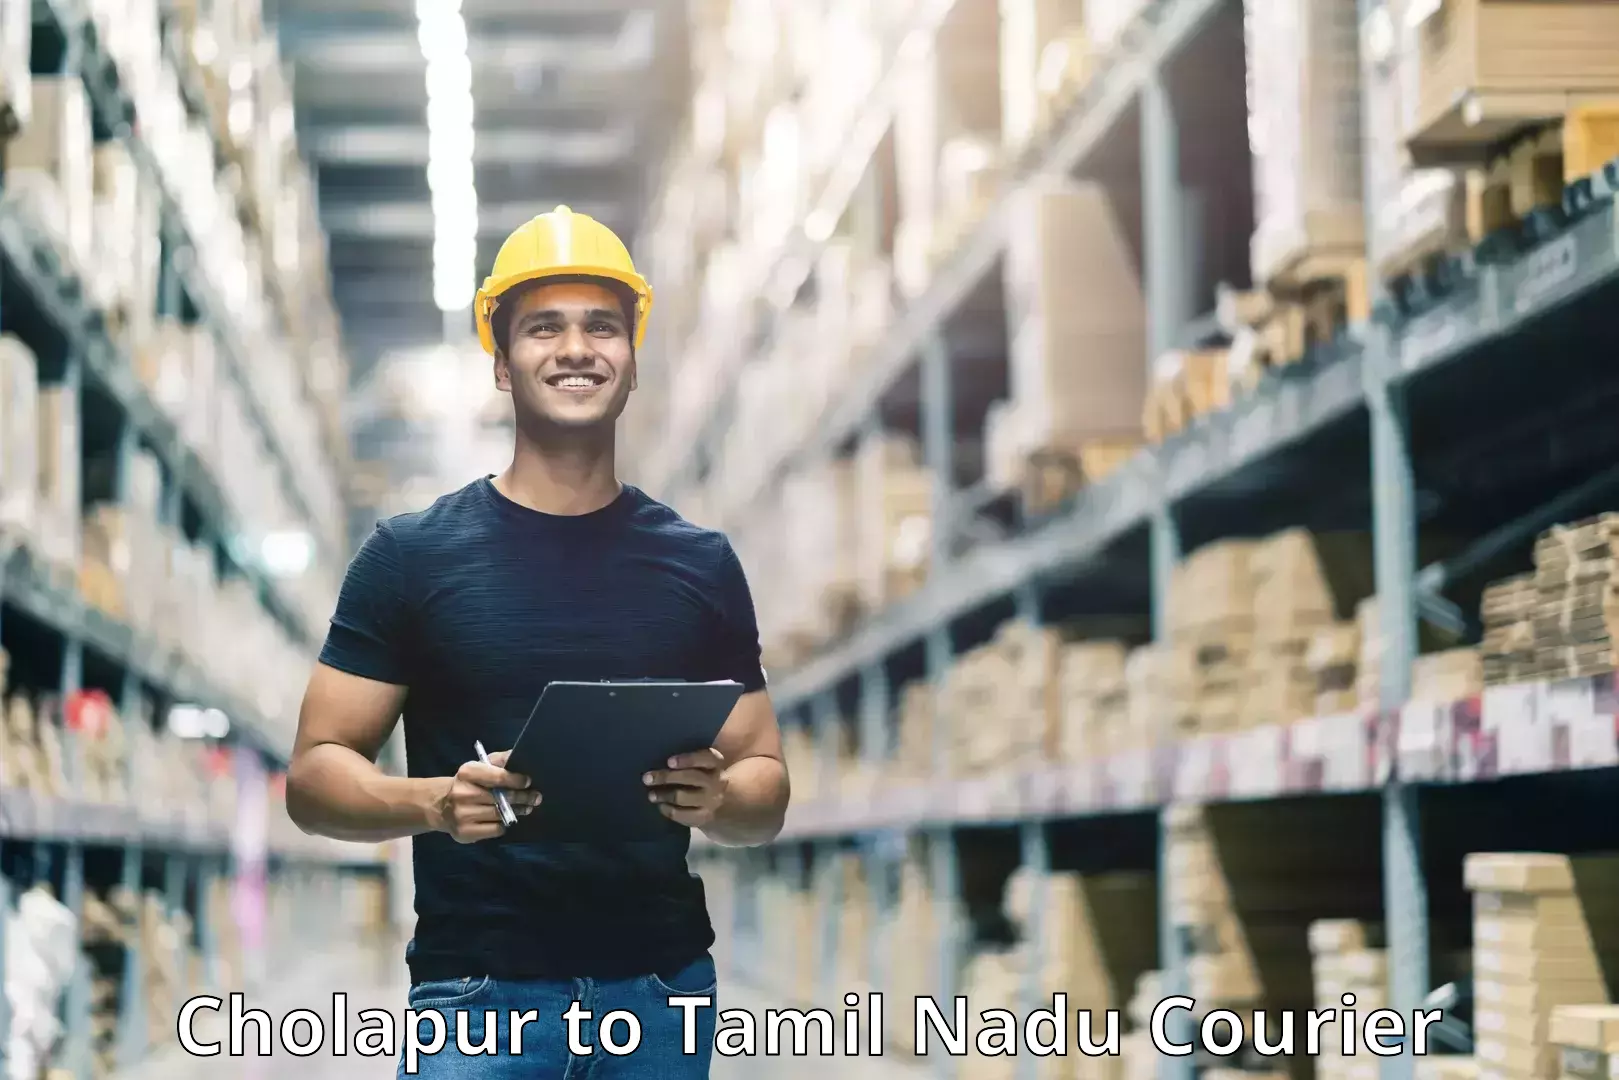 Easy access courier services in Cholapur to Tamil Nadu